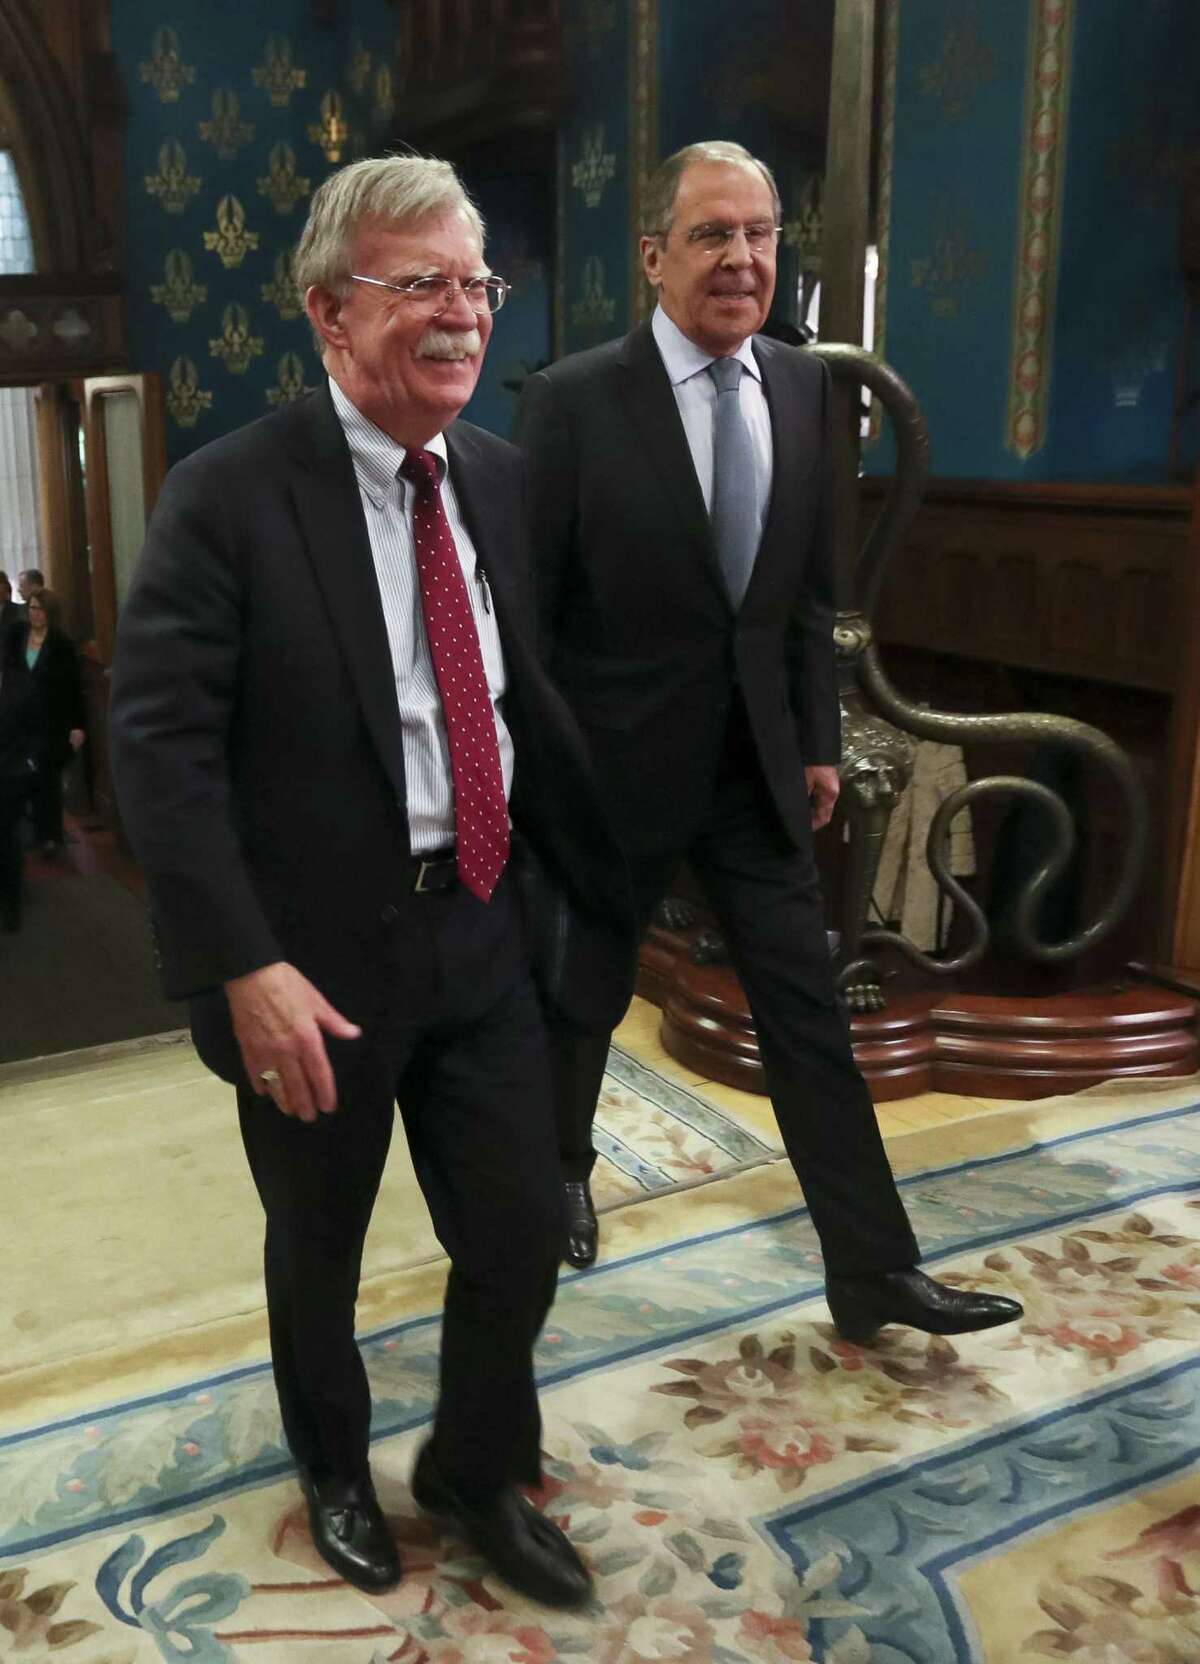 U.S. National Security Adviser John Bolton, left, and Russian Foreign Minister Sergey Lavrov enter a hall for their talks in Moscow, Russia, Monday, Oct. 22, 2018. President Trump’s national security adviser has met with top Russian officials after Trump declared he intended to pull out of a 1987 nuclear weapons treaty.